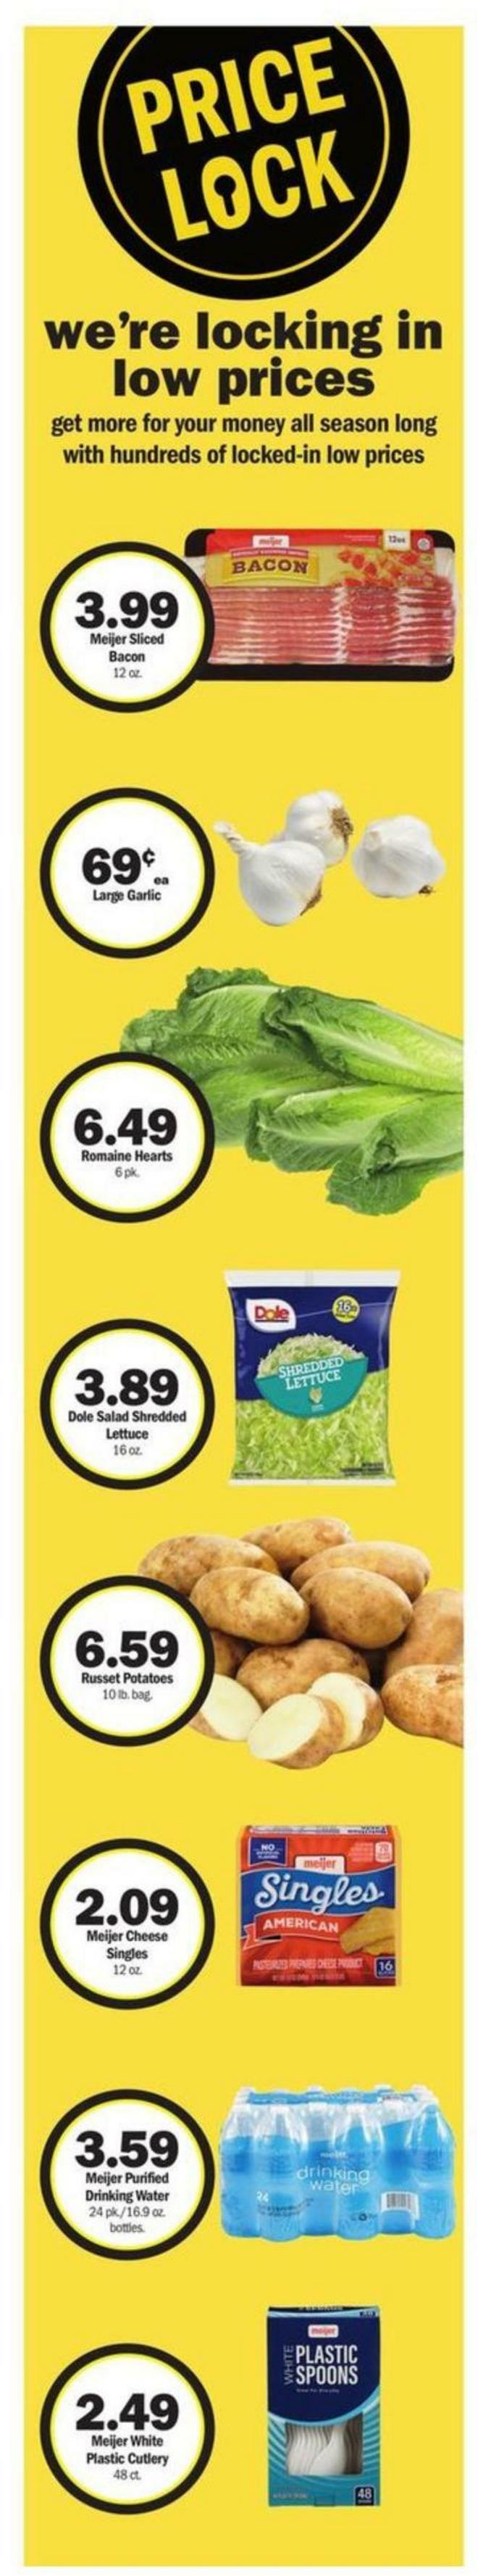 Meijer Weekly Ad from March 5